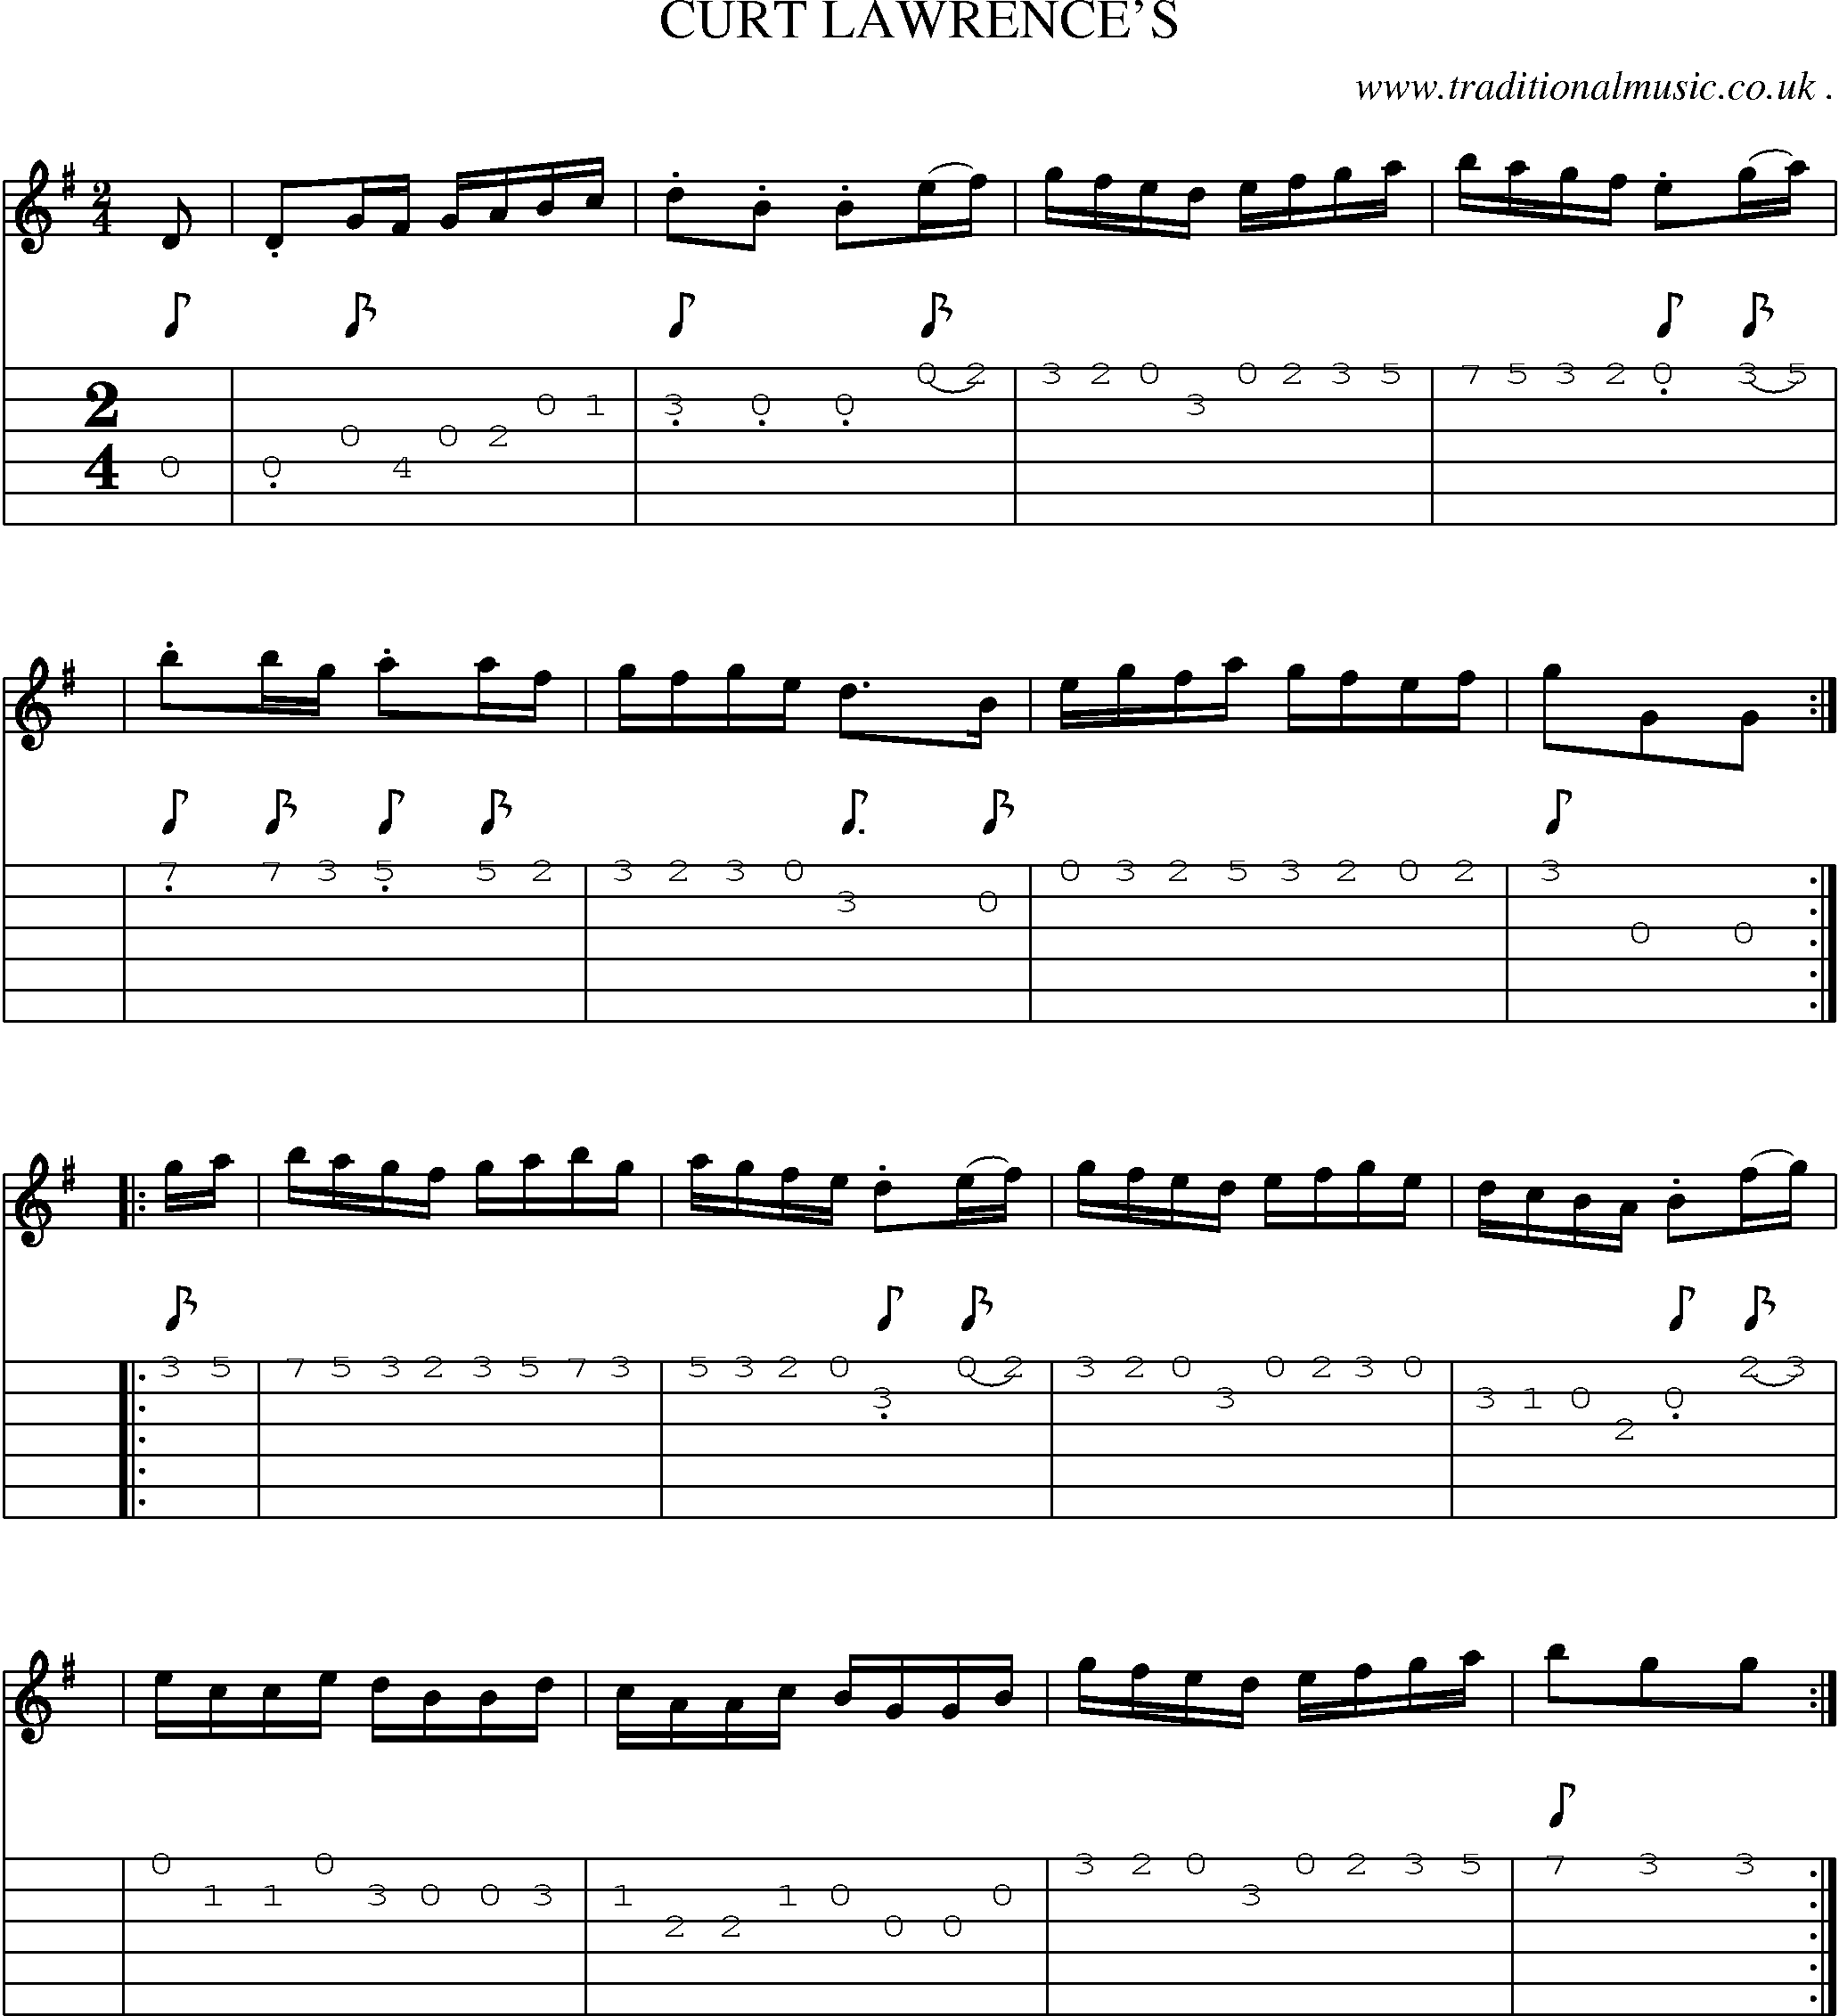 Sheet-Music and Guitar Tabs for Curt Lawrences